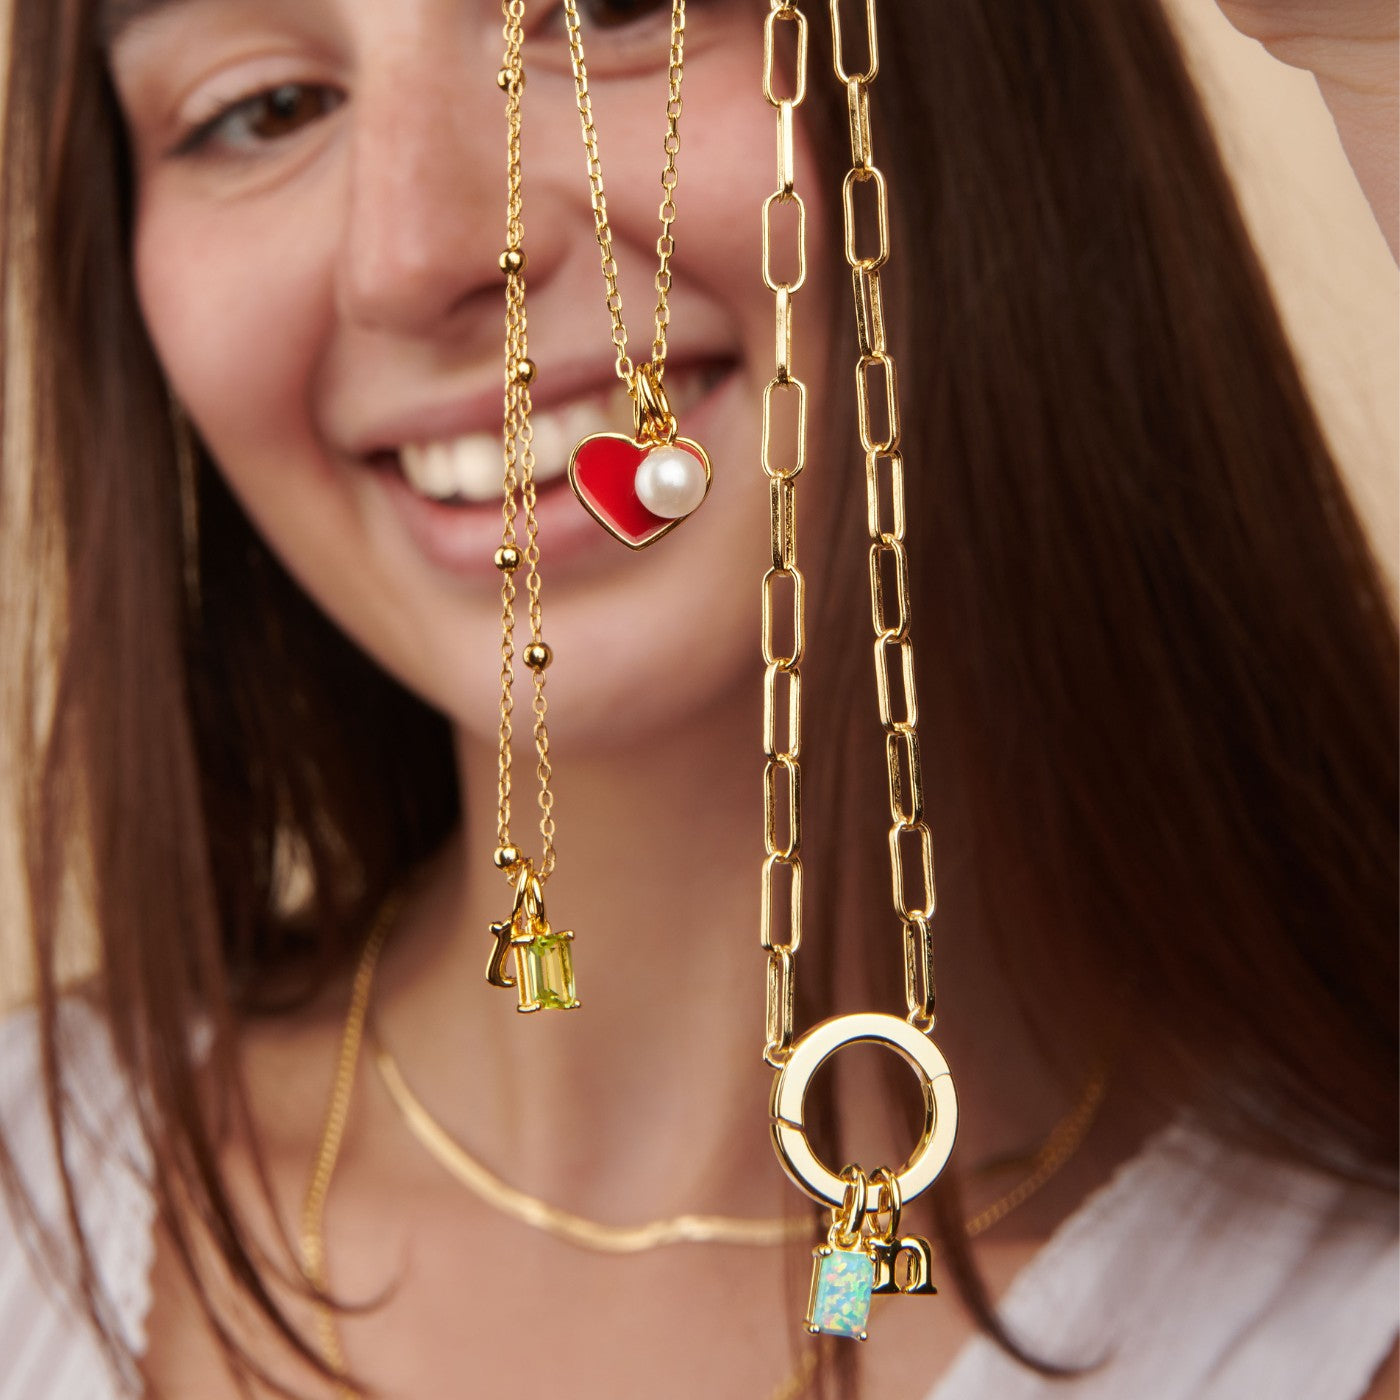 Explore Little Sky Stone's Ultimate Charm Collection to Elevate Your Style. Our carefully curated assortment includes birthstone pendants, heart-shaped gems, celestial wonders, and meaningful symbols. Crafted with exceptional skill, each charm is a blend of elegance and individuality, perfect for personalizing your look.